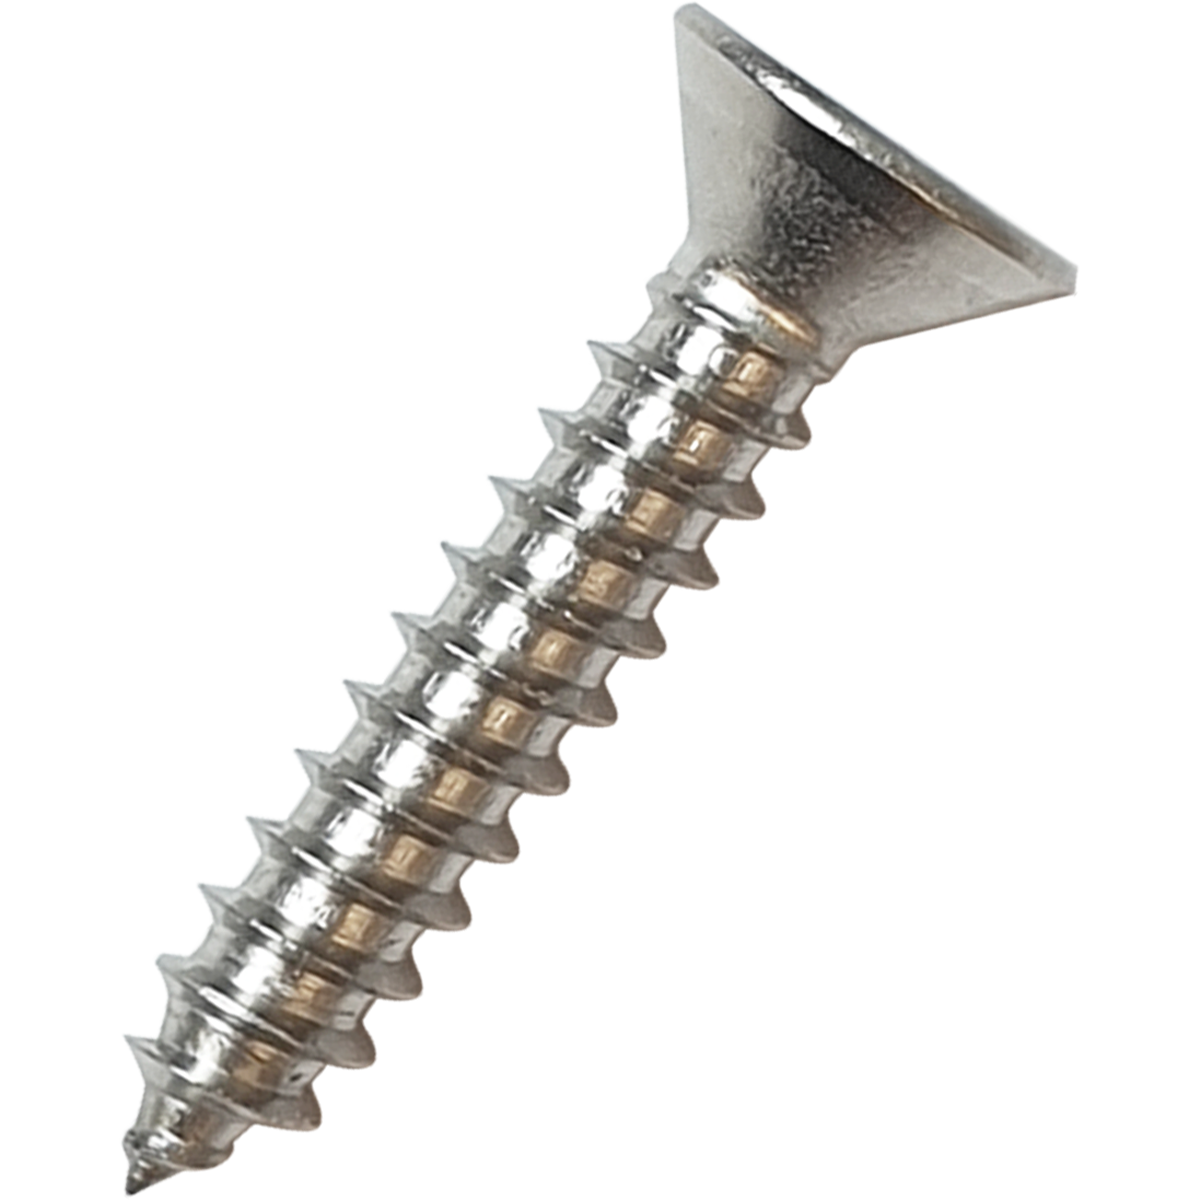 Countersunk self tapping screws, also known as self tappers, available at competitive prices